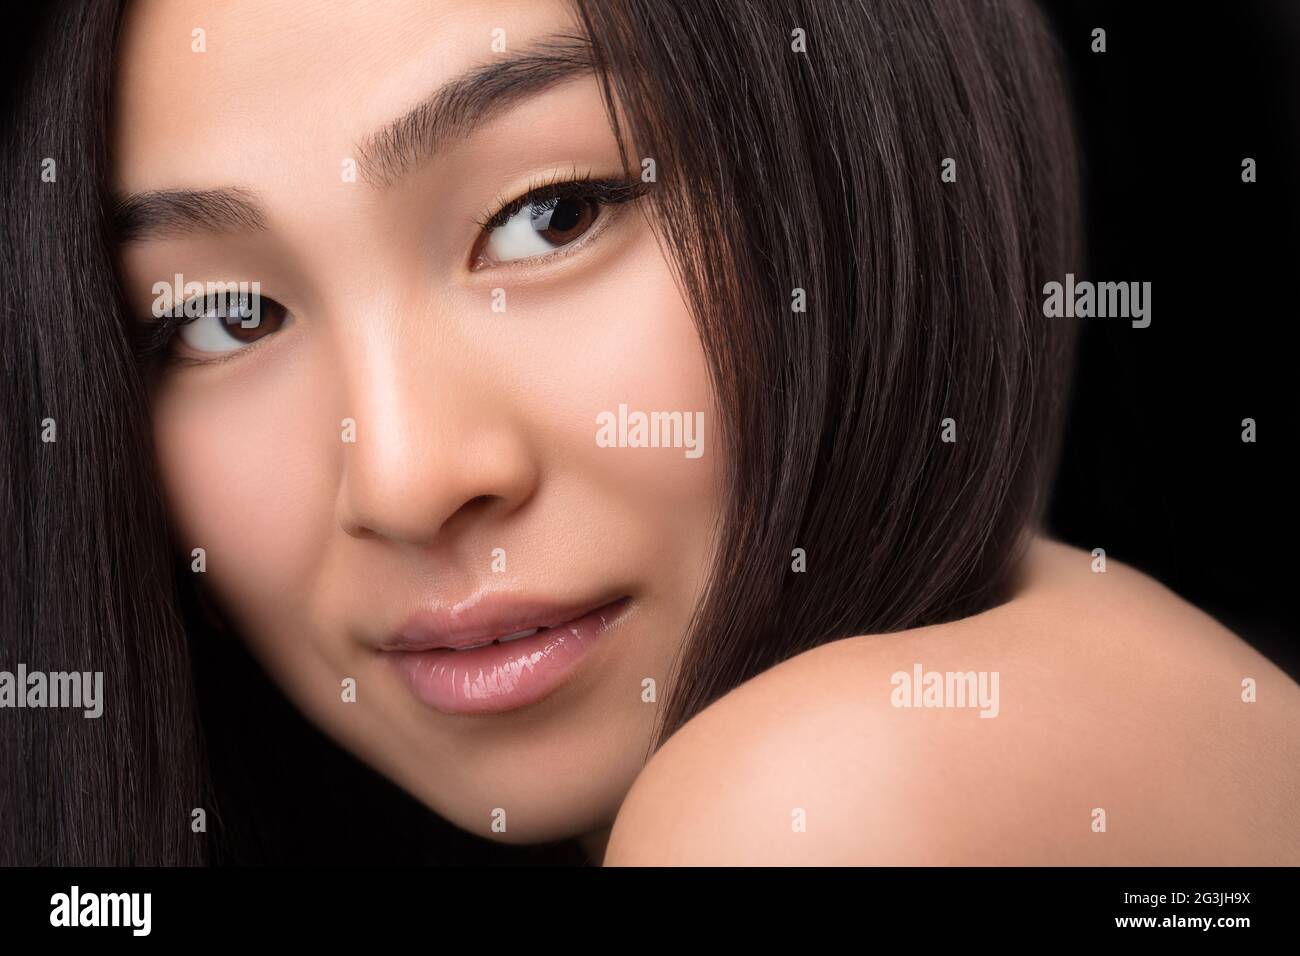 Face of Asian lady Stock Photo